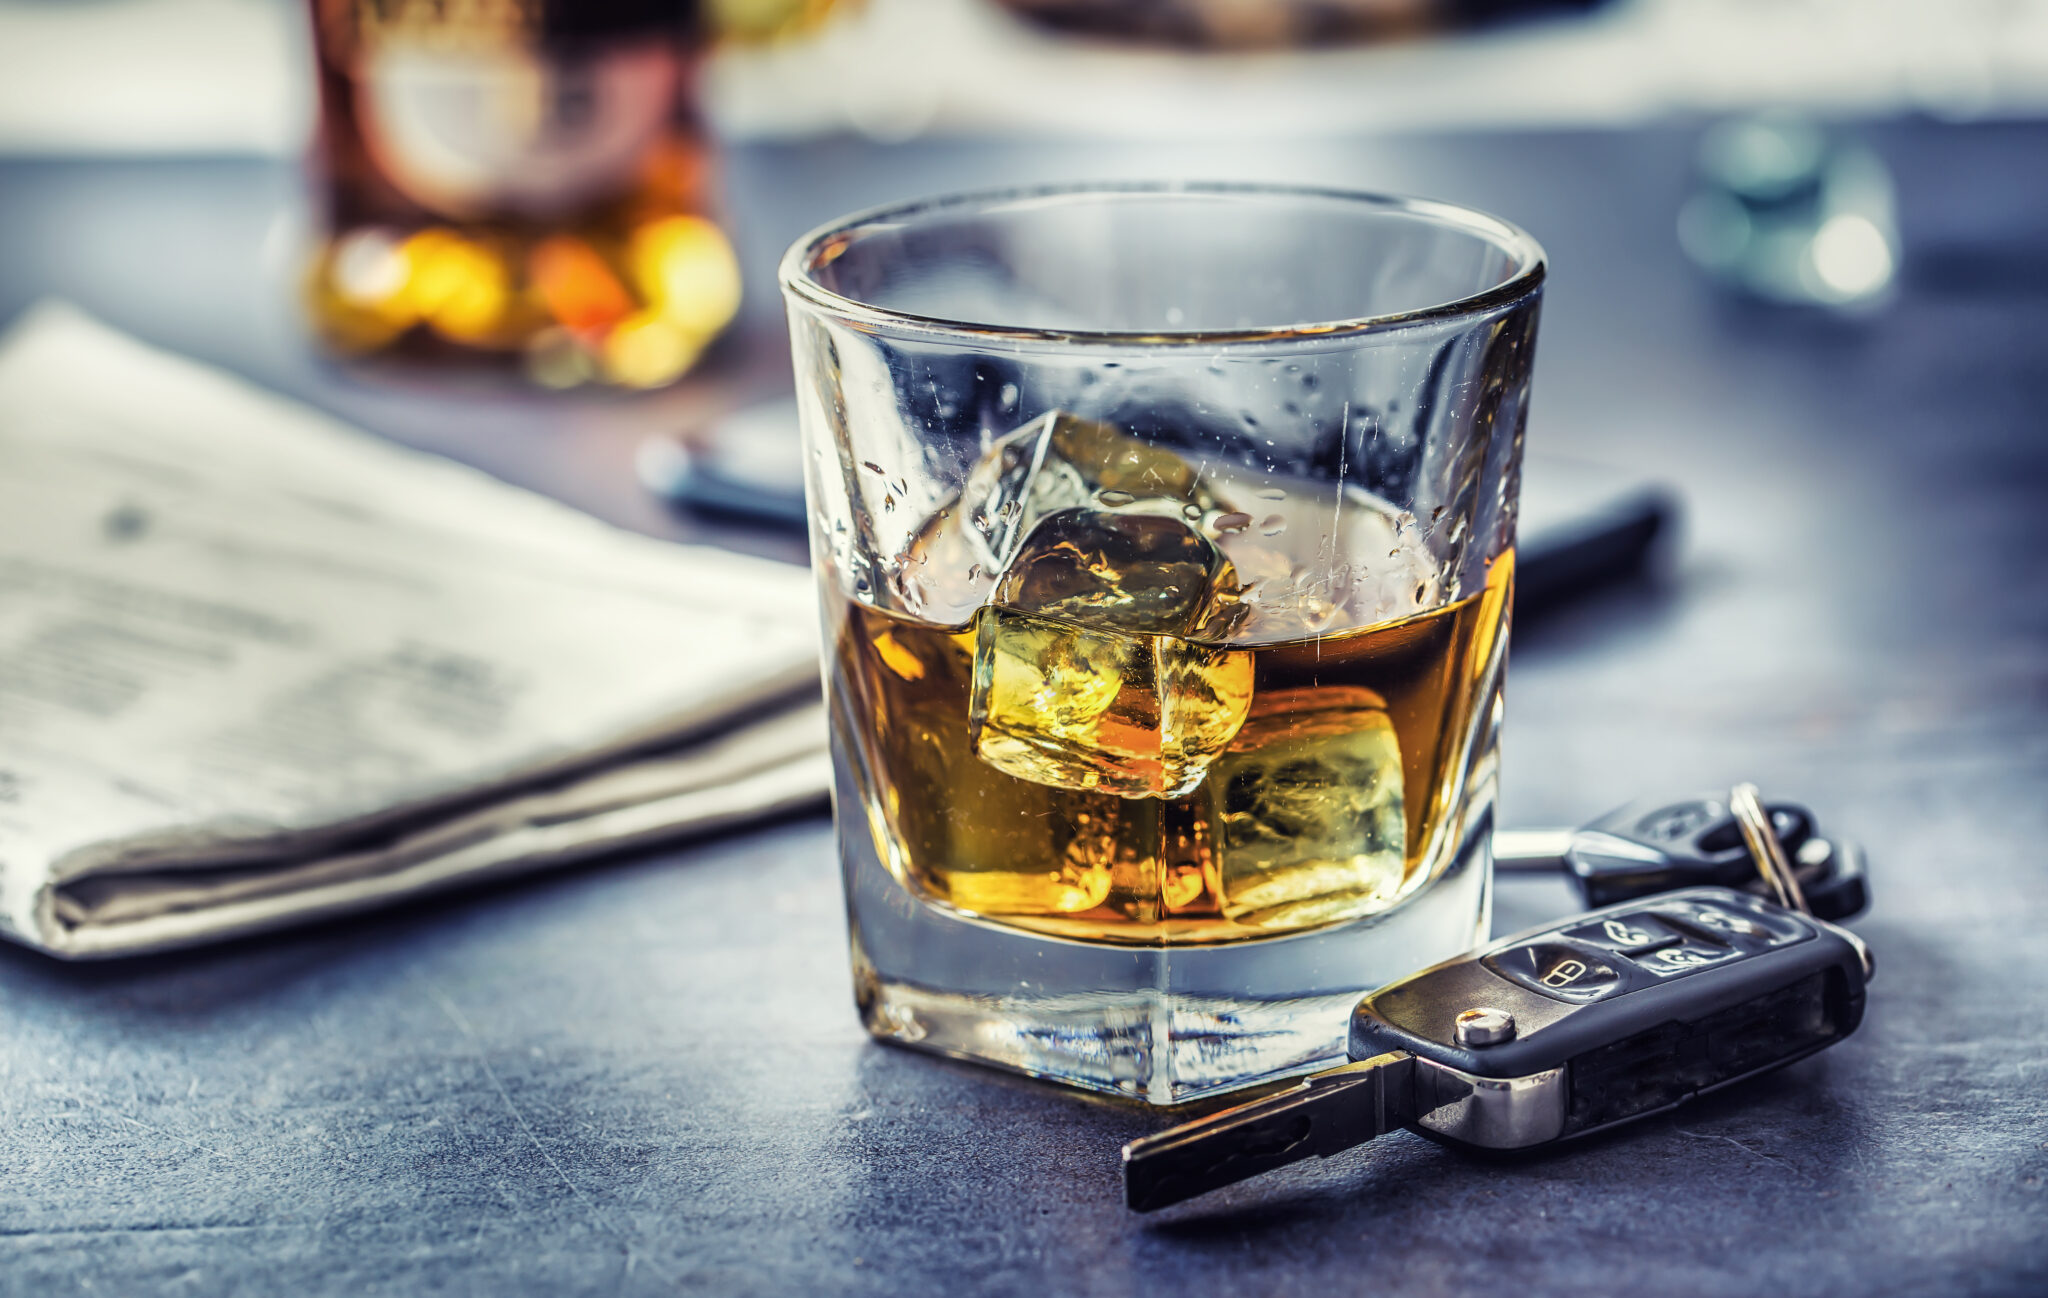 Glass of liquor that could get you a DUI and affect your car insurance